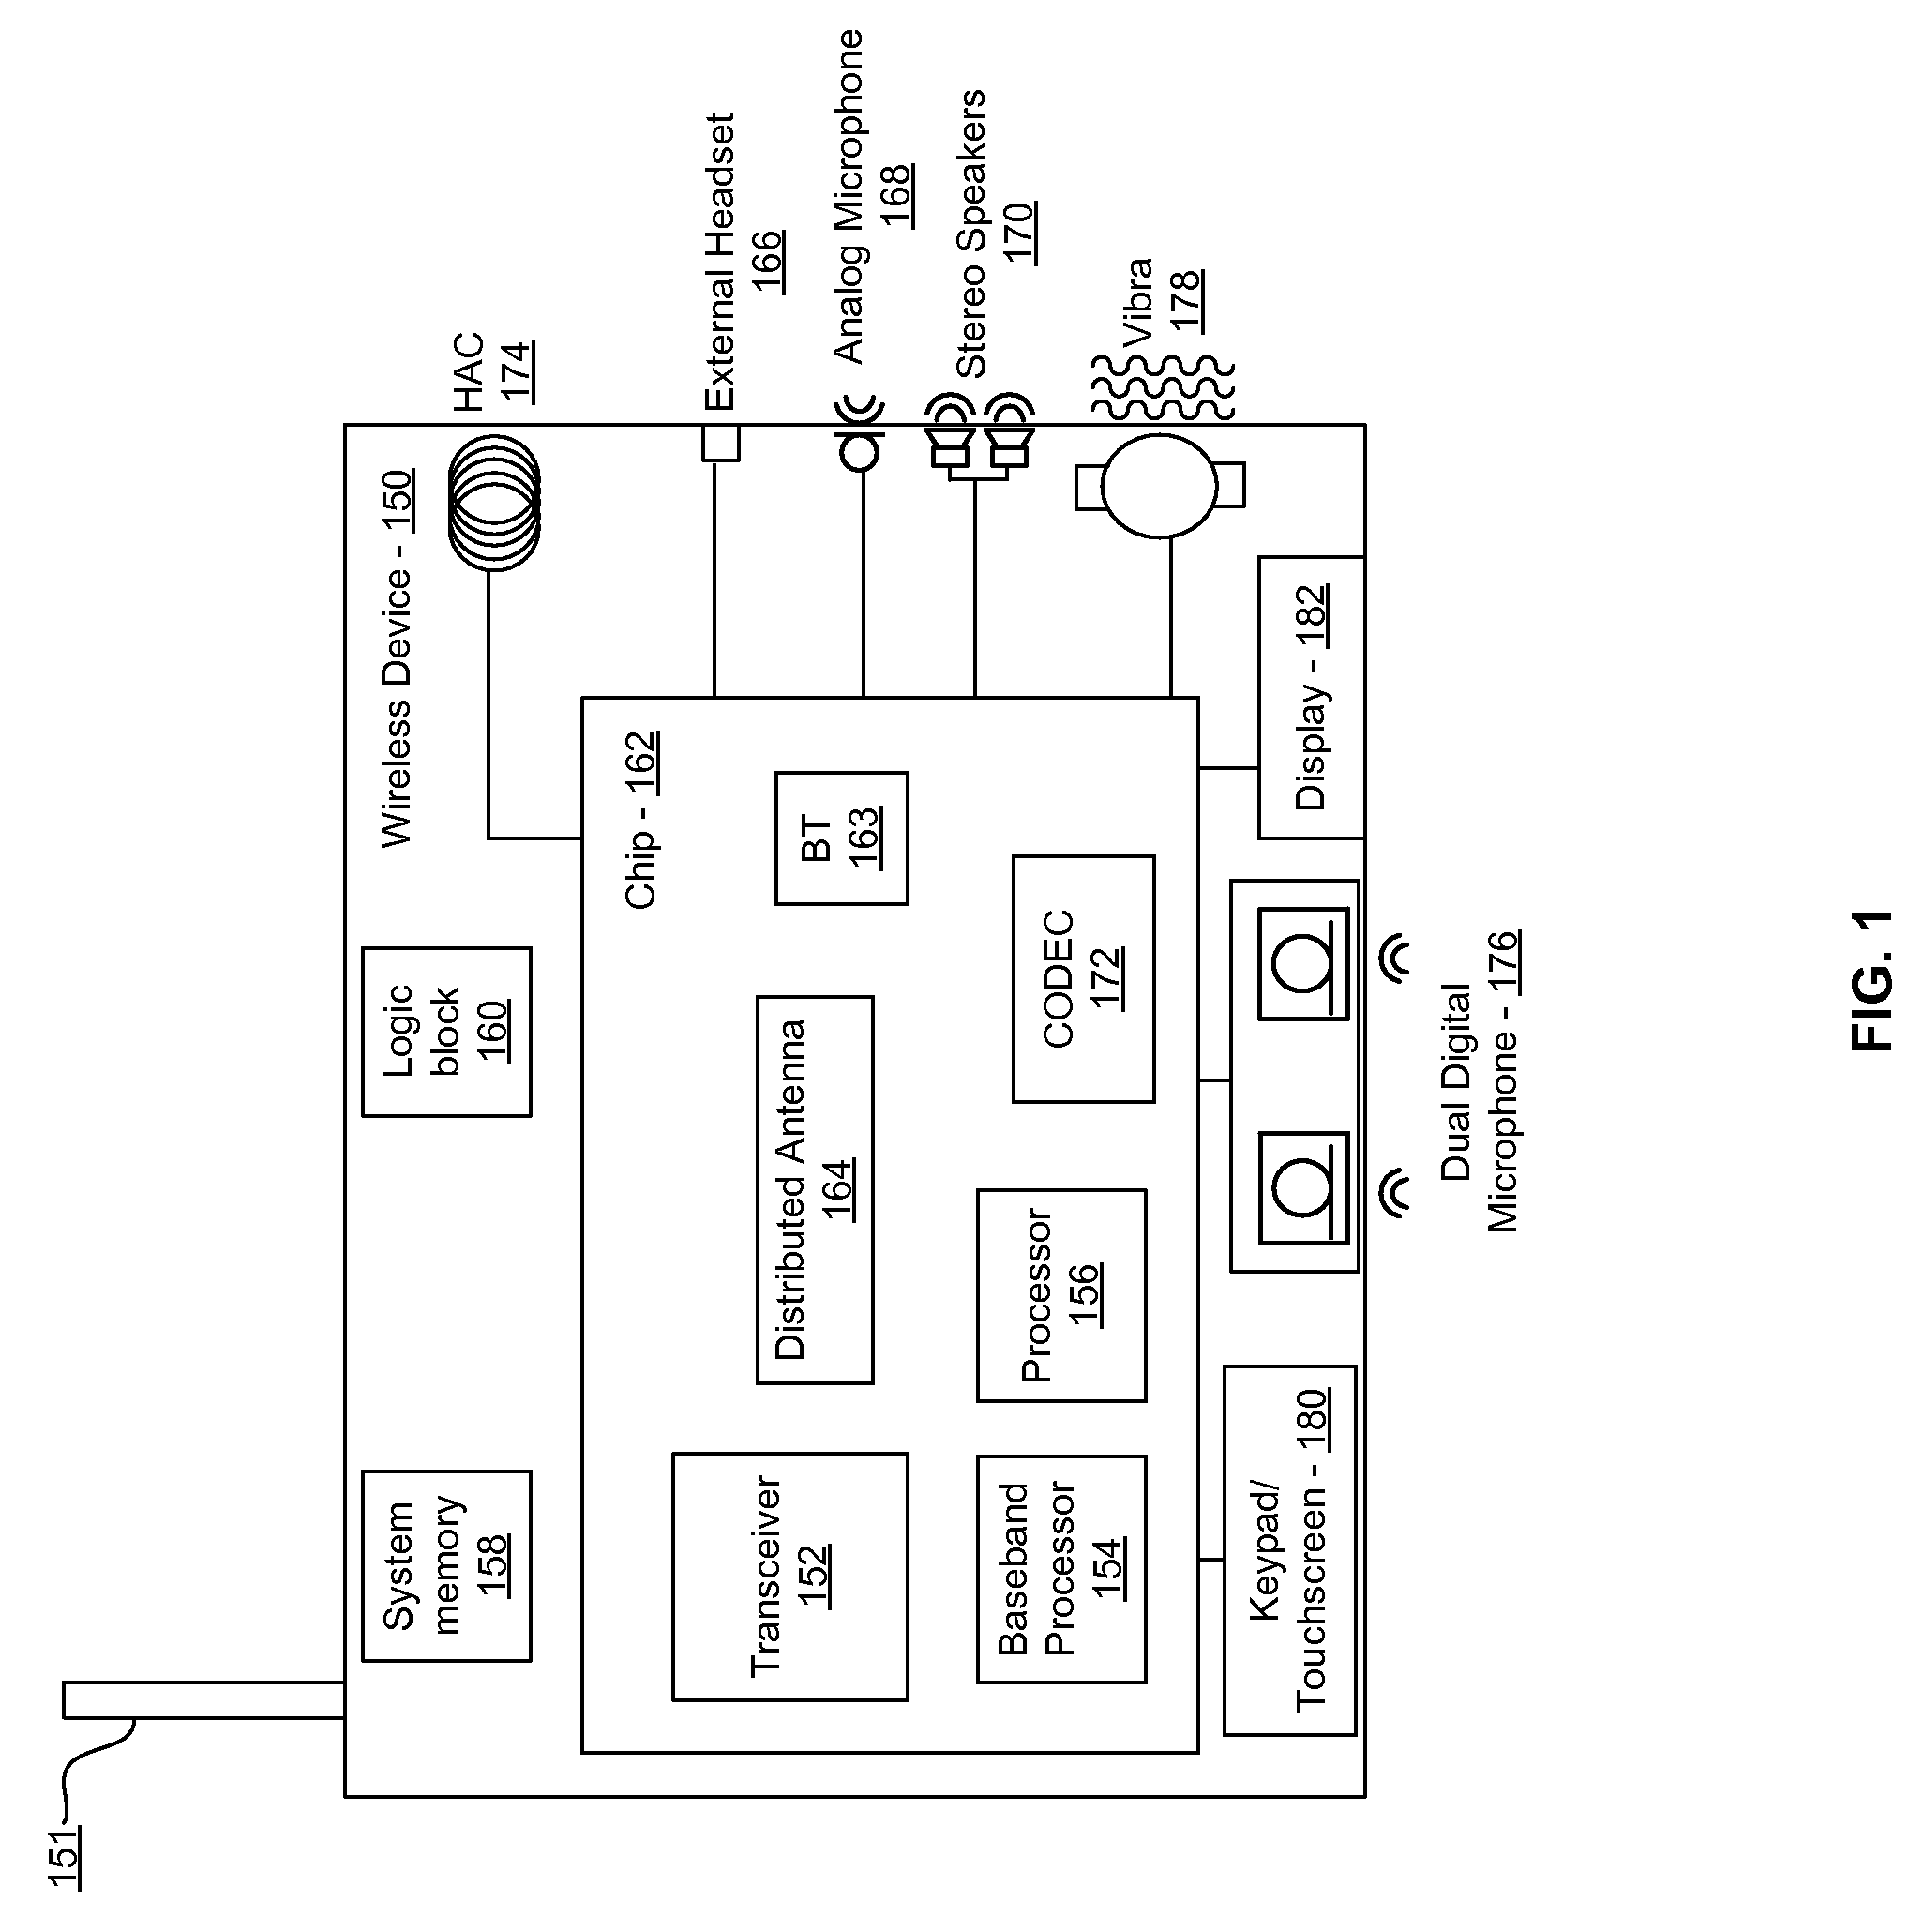 Method and system for receiving signals via multi-port distributed antenna